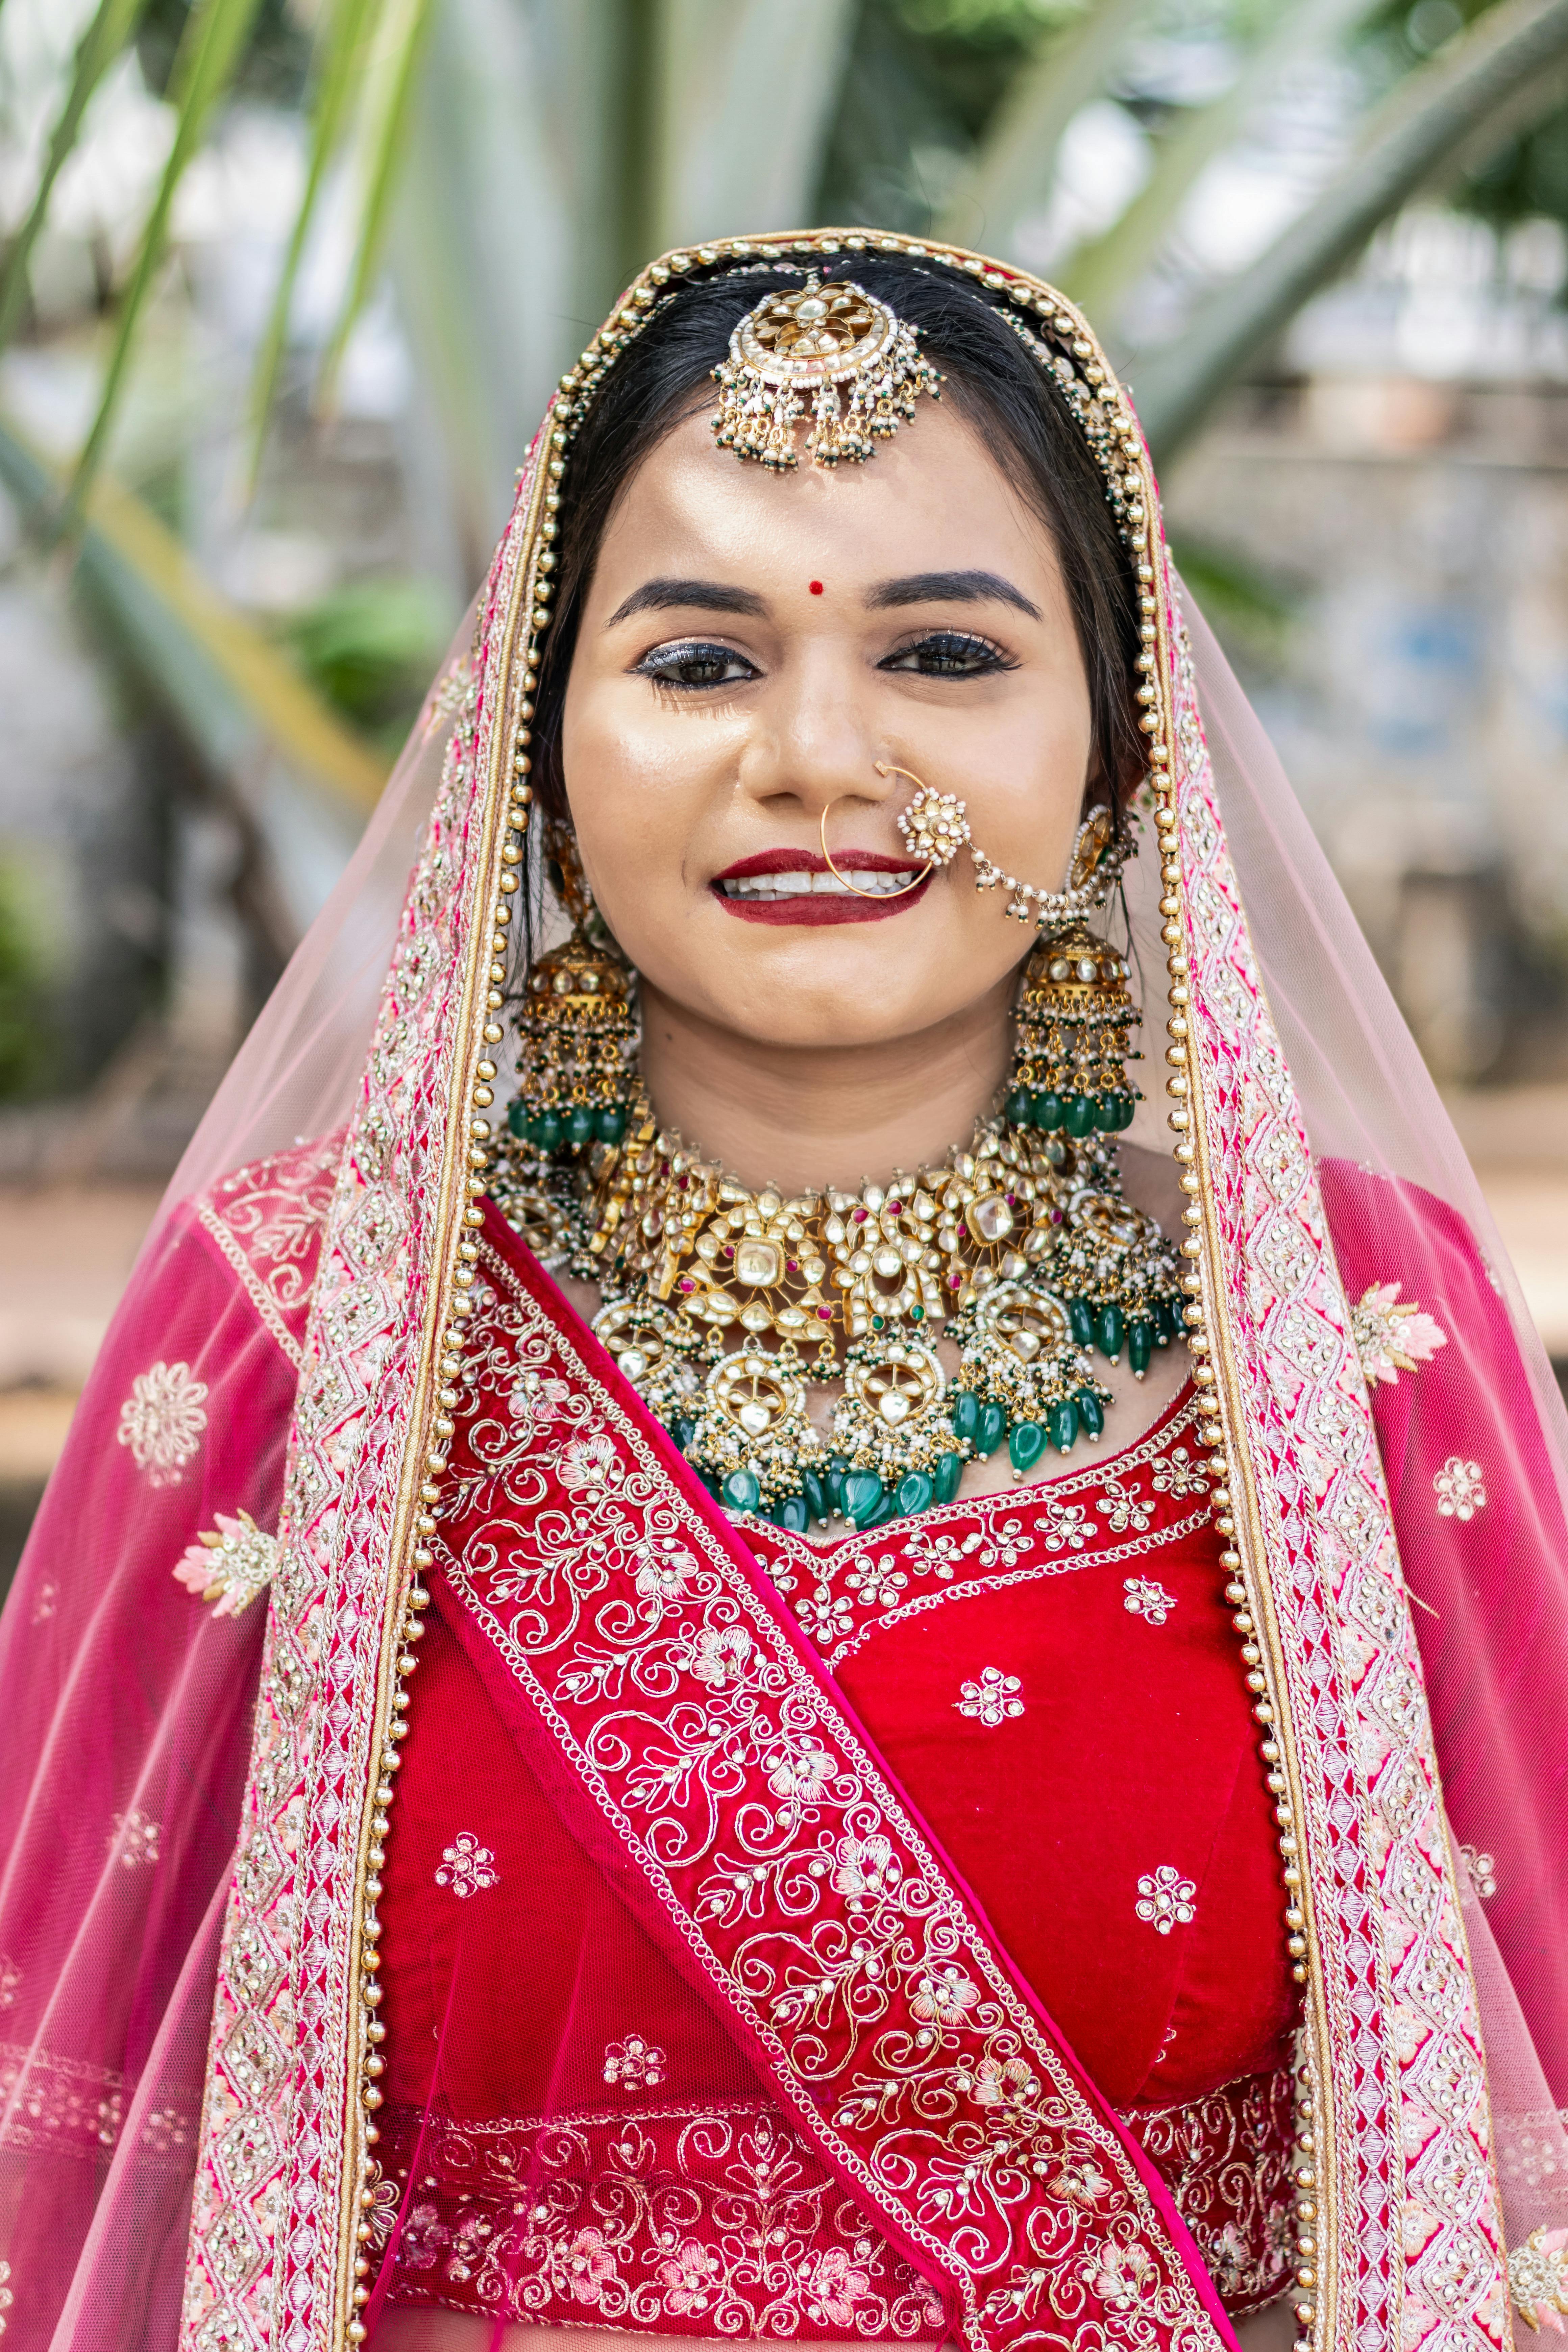 Gujarati Brides Face Hidden Behind A Veil Photo Background And Picture For  Free Download - Pngtree